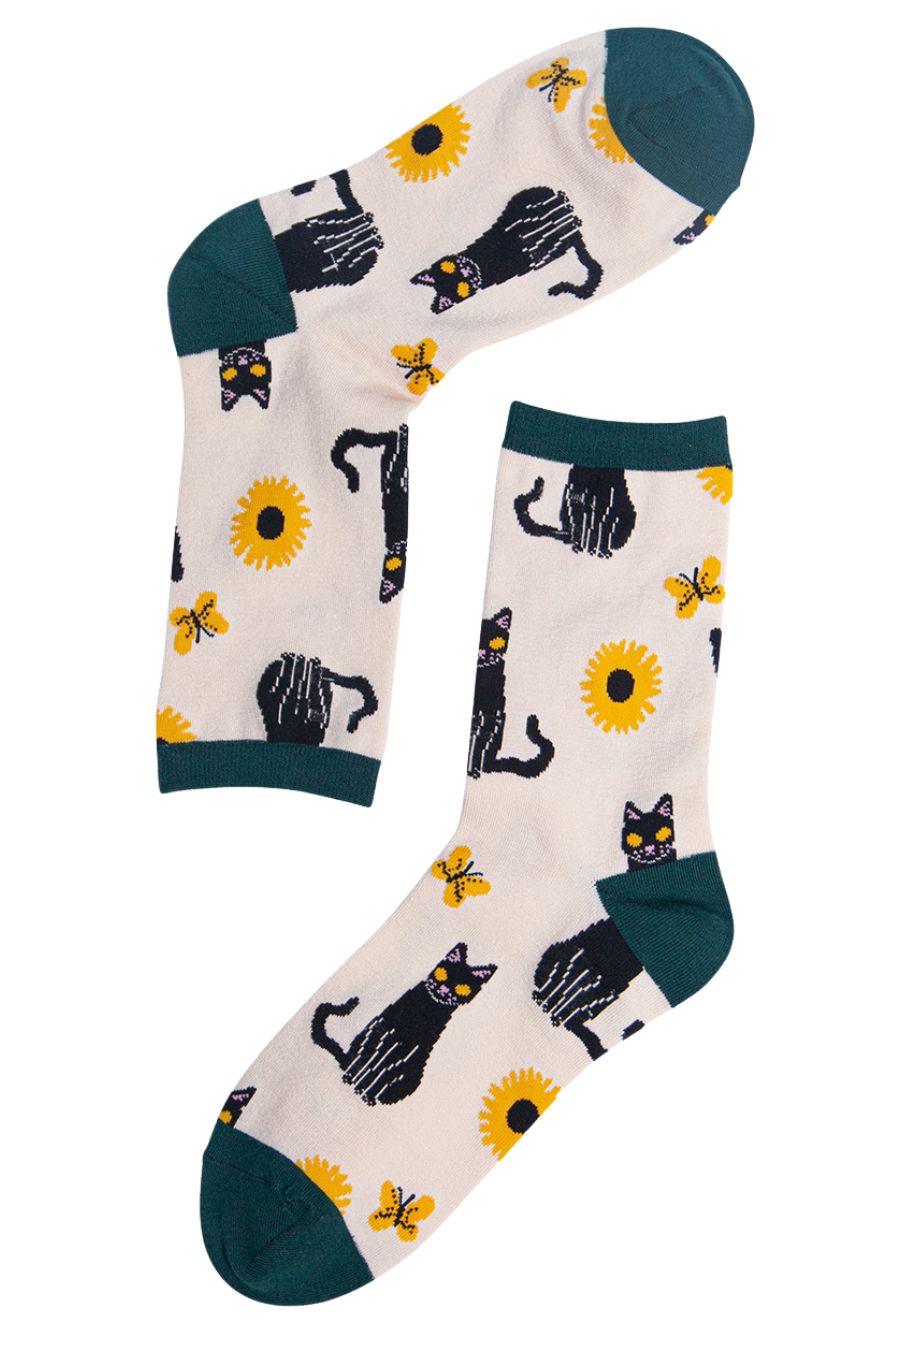 cream socks with black cats and yellow flowers